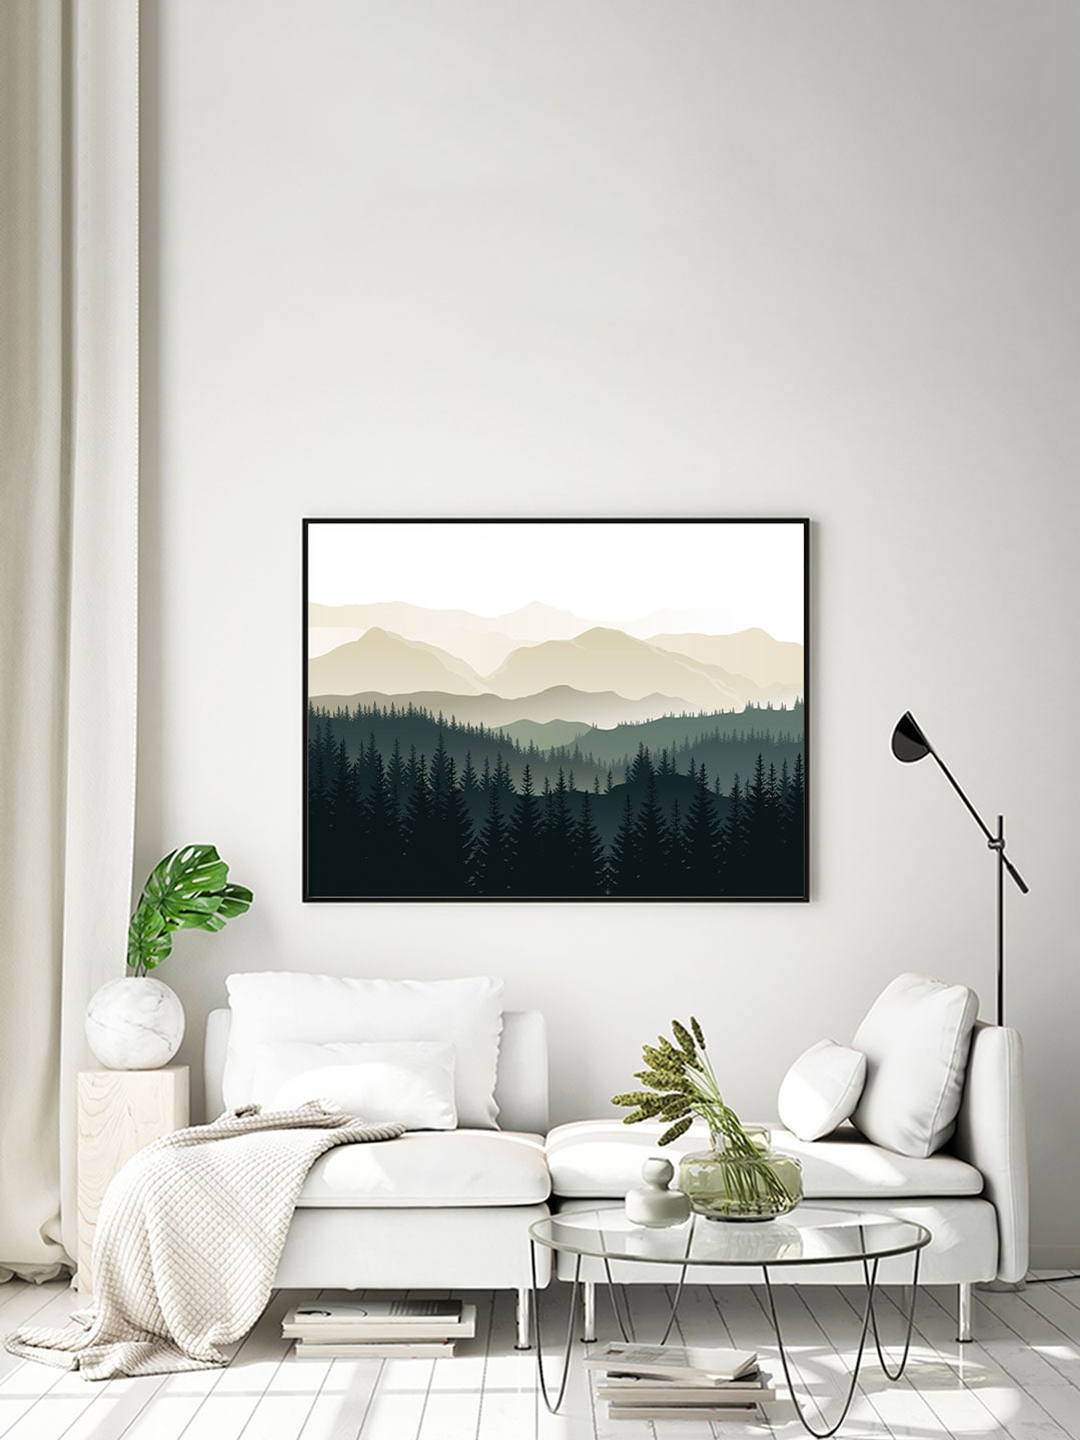 ARTSPACE White & Green Landscape Nature Canvas Wall Painting